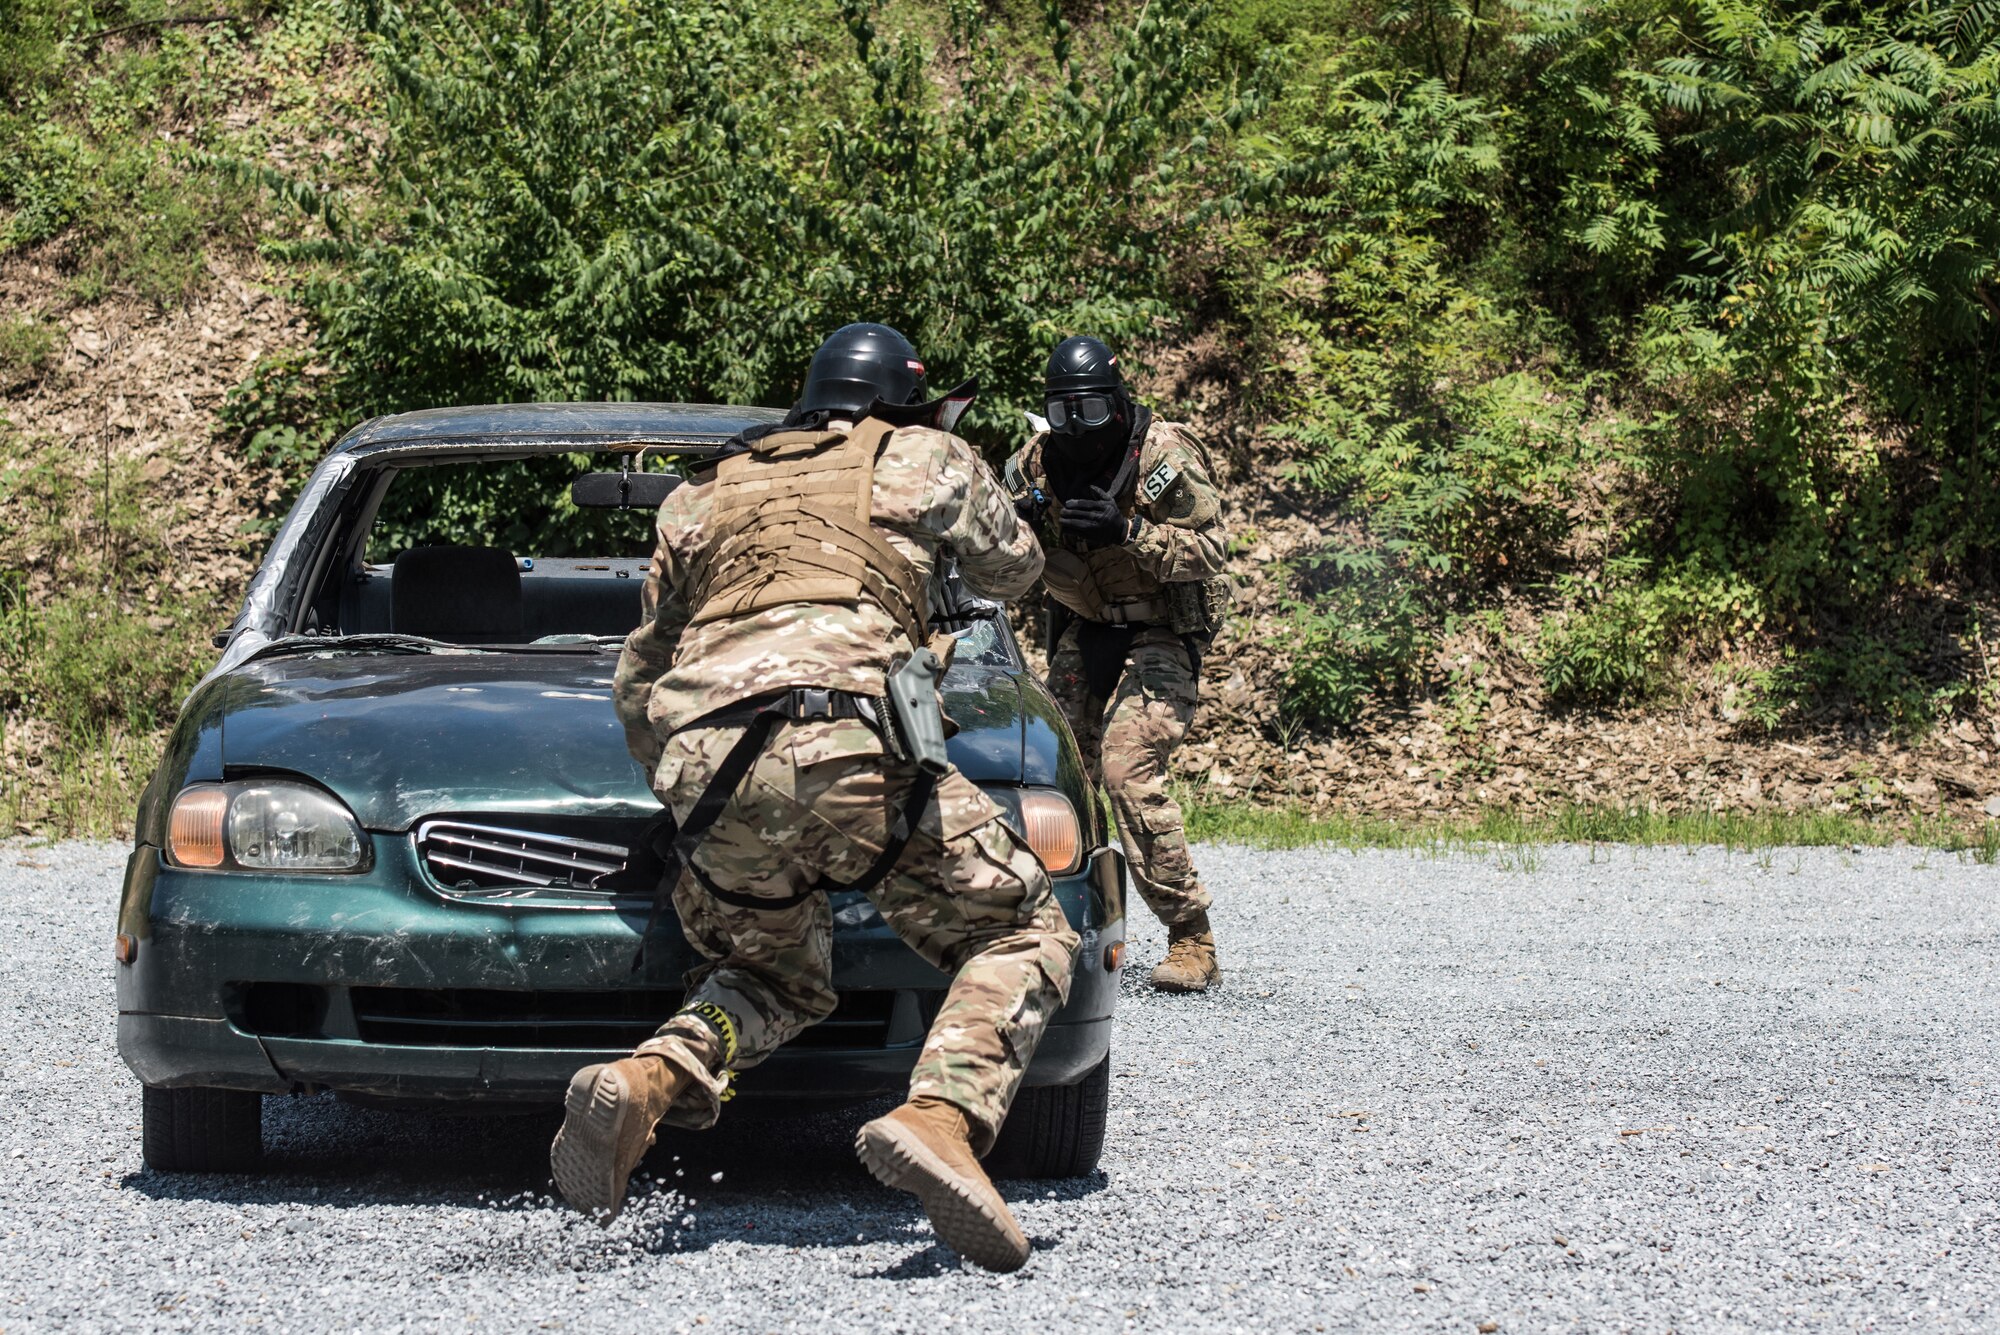 193rd Special Operations Security Forces Squadron  conduct a force-on-force drill during armed vehicle defense training.